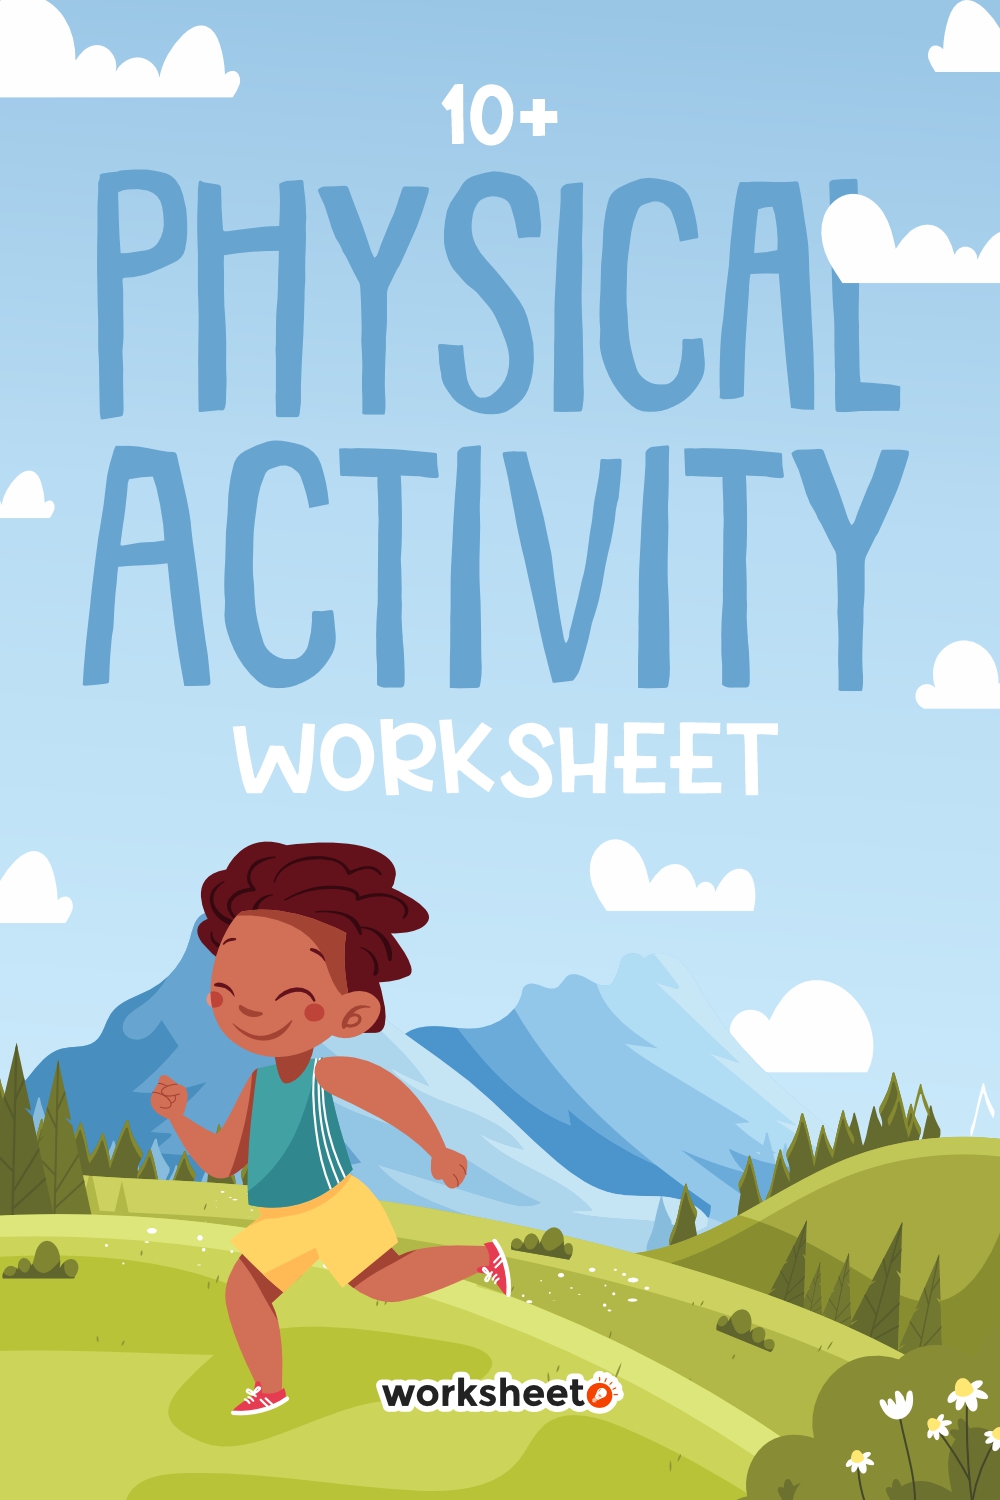 8 Images of Physical Activity Worksheet